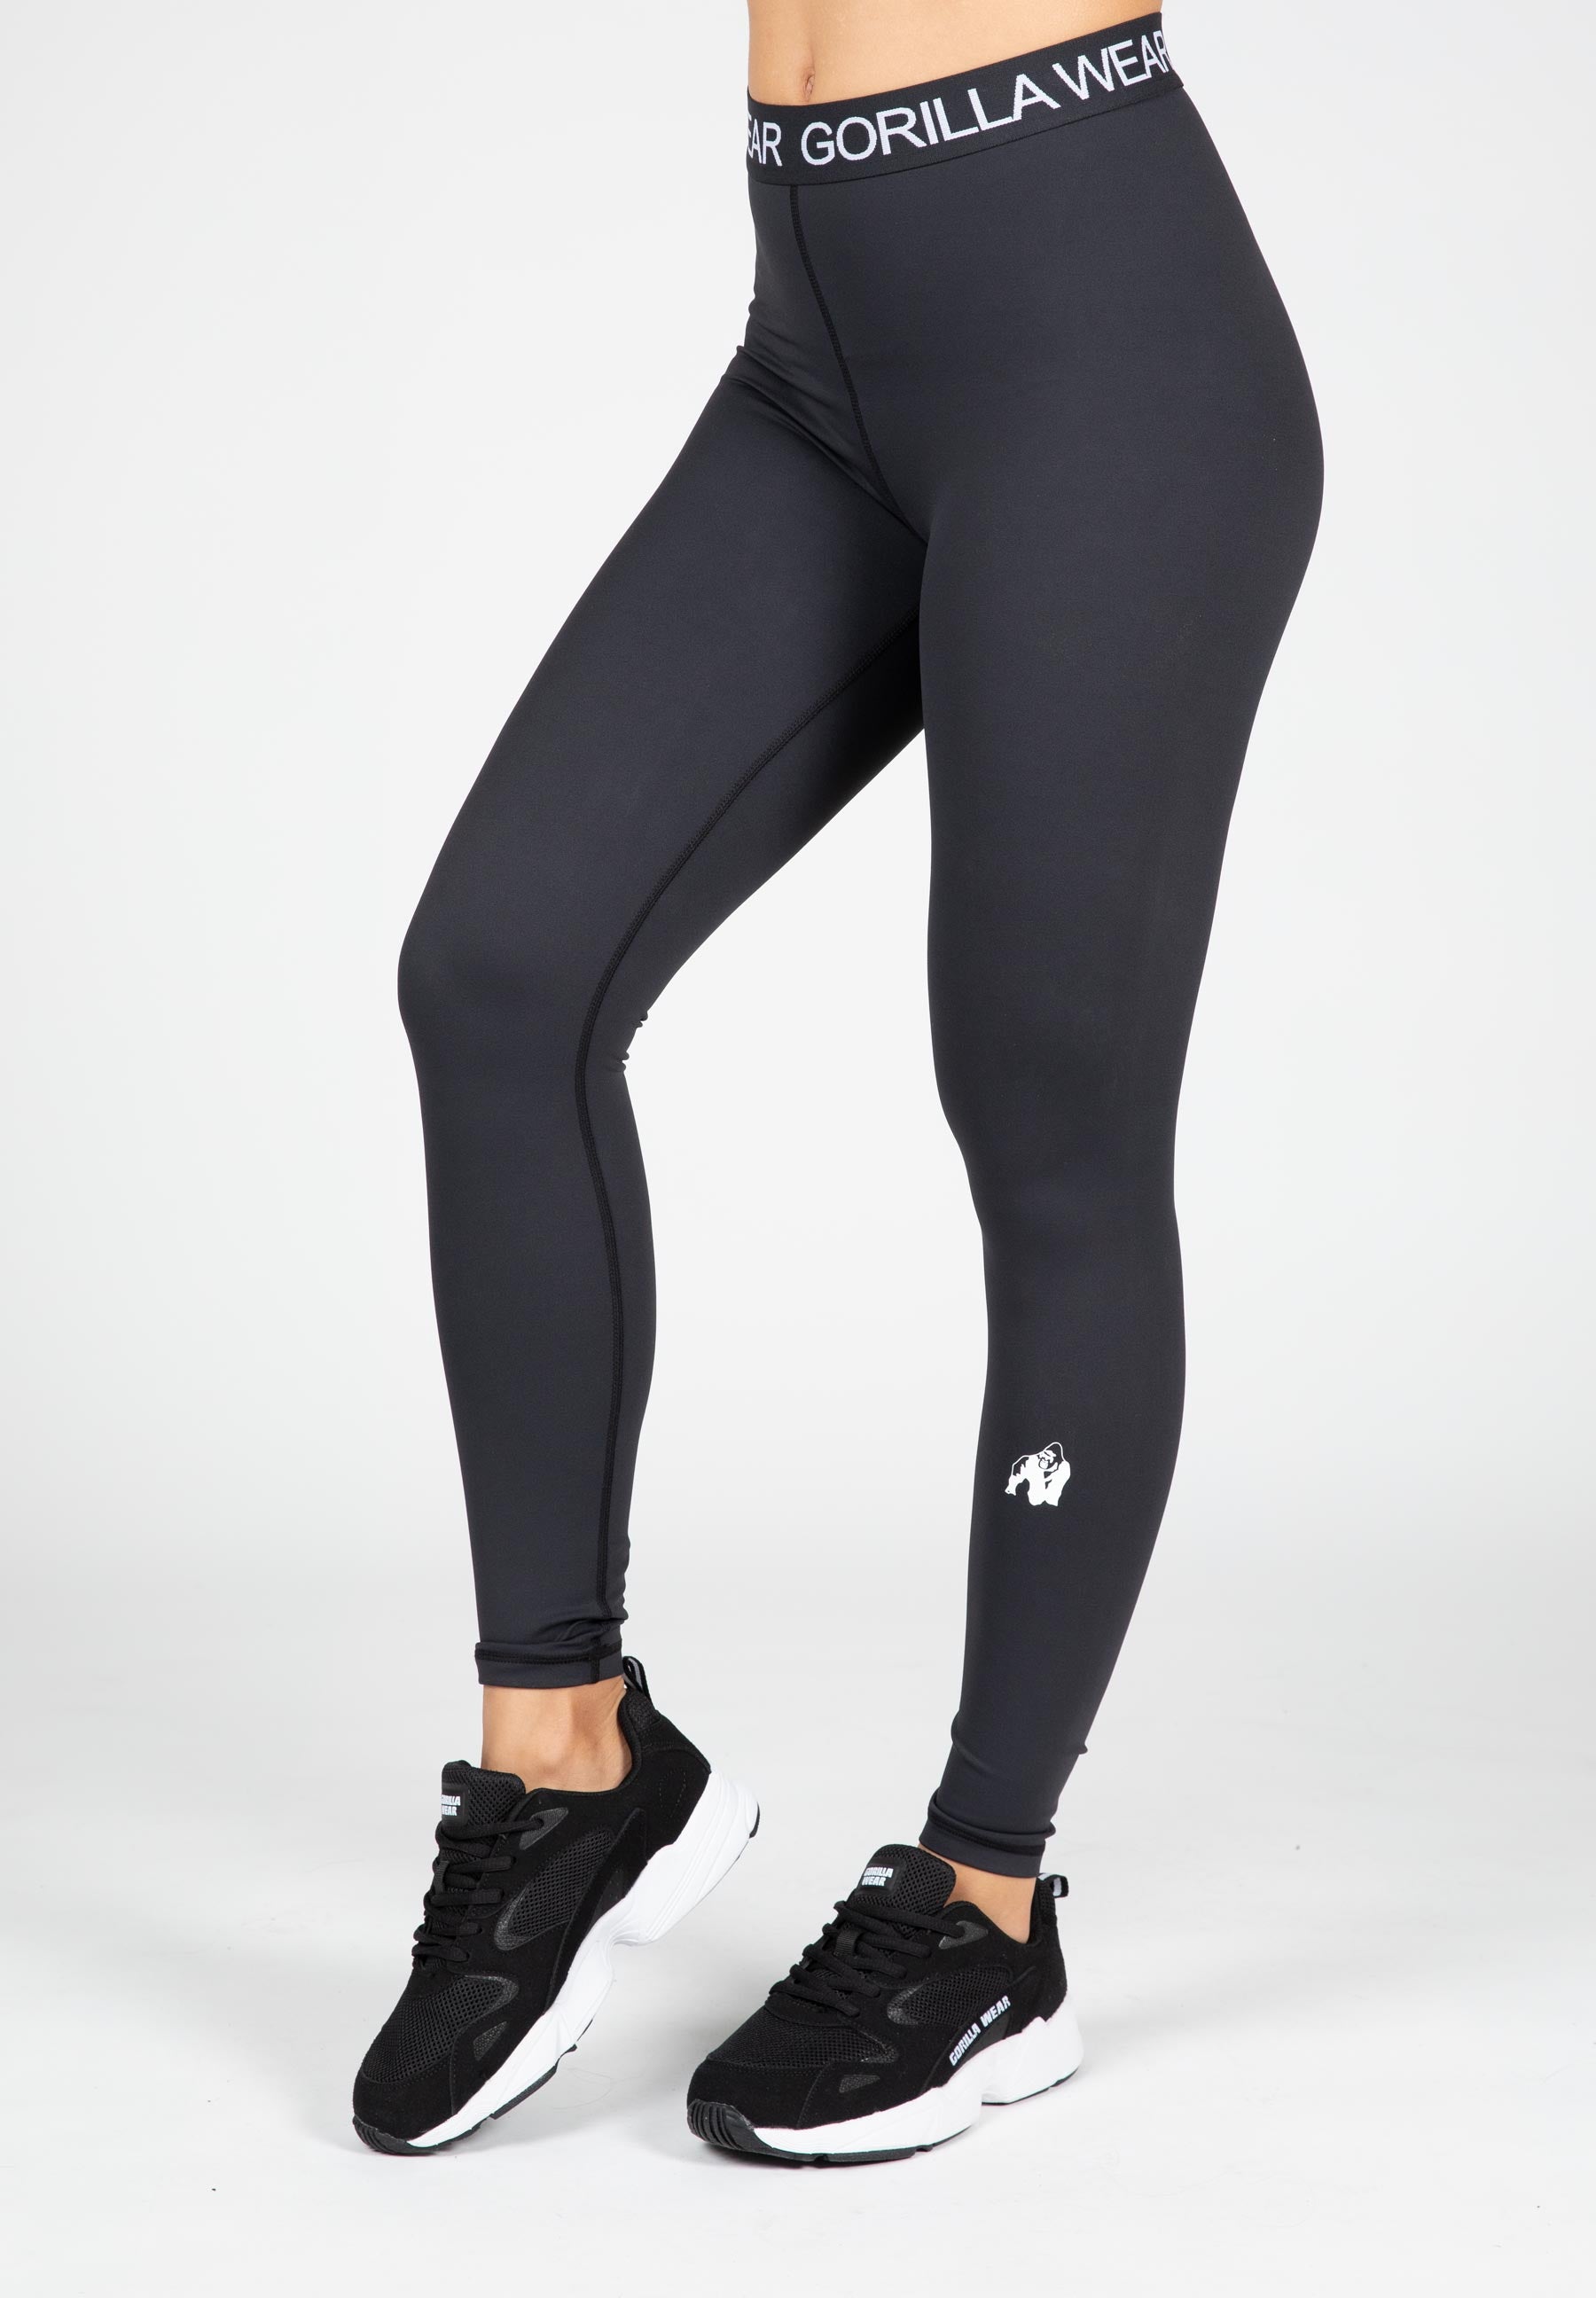 Caly's Fit Fashion - The new Kamo Fitness leggings have dropped